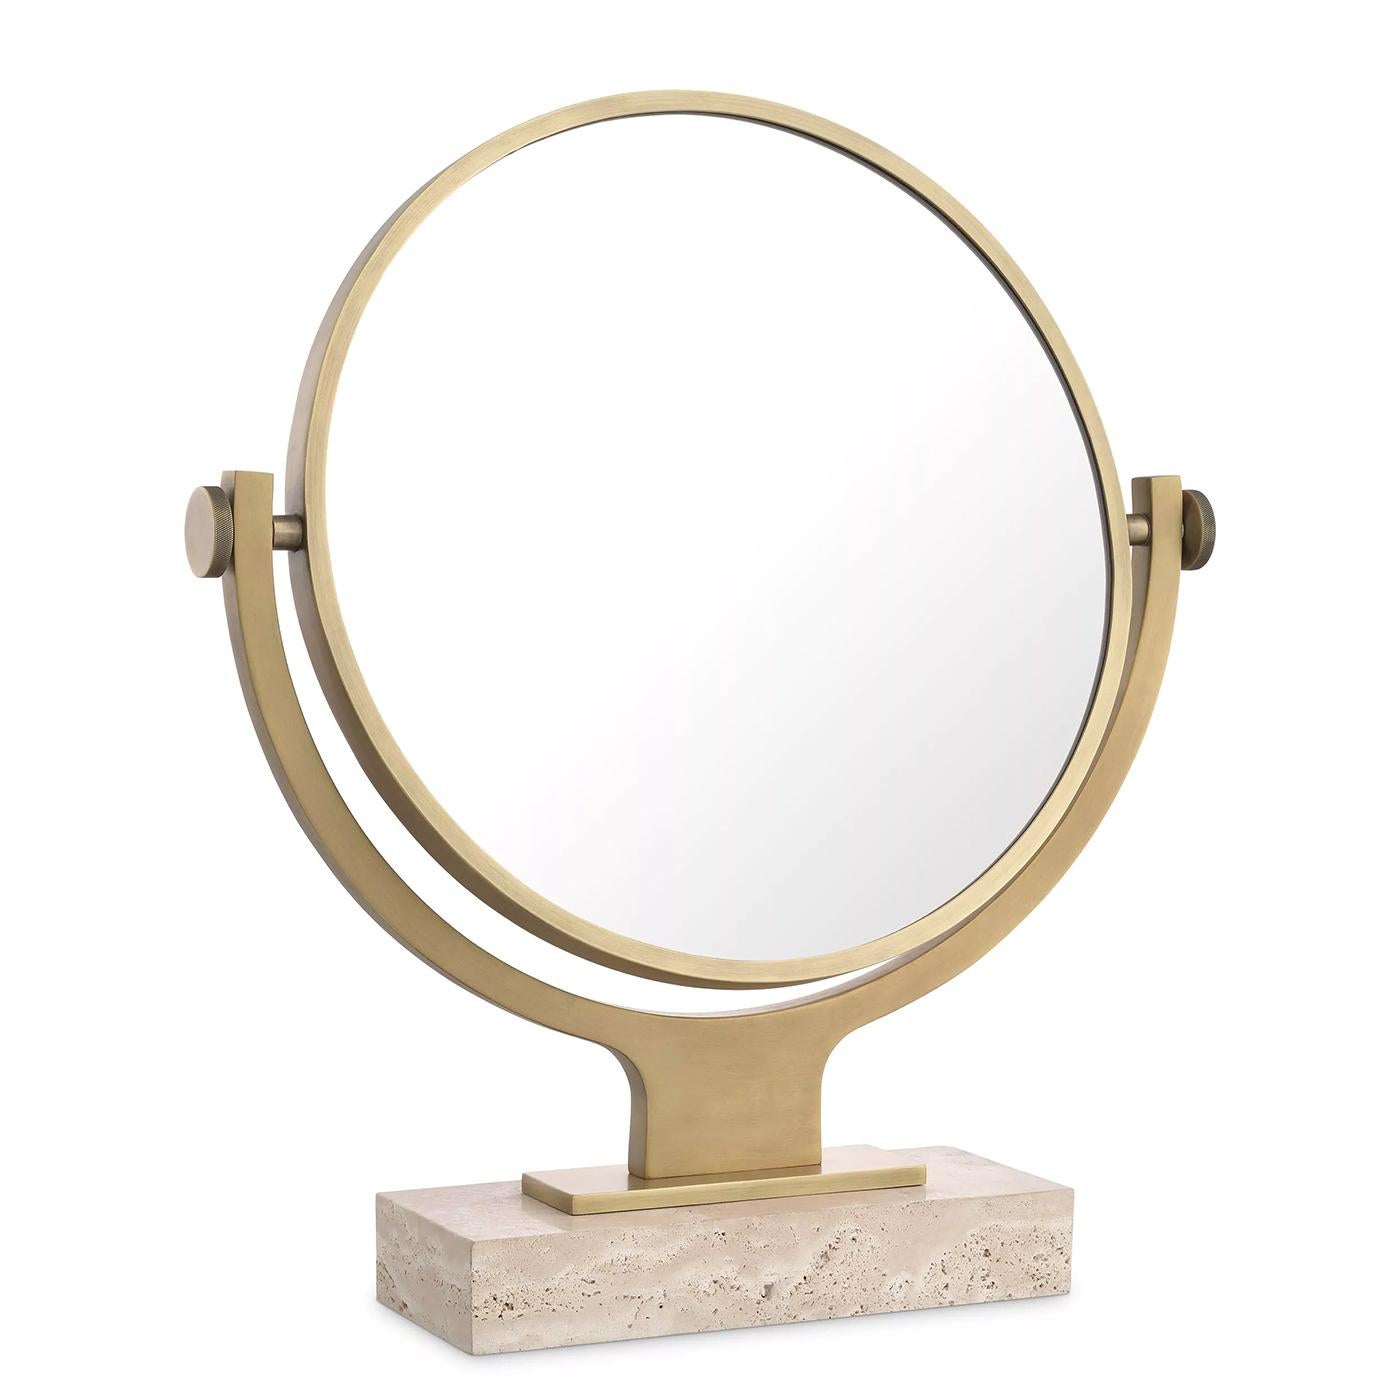 Mirror Narcisse with carved travertine base and
structure in brass and iron in antique finish. With
removable round mirror glass.